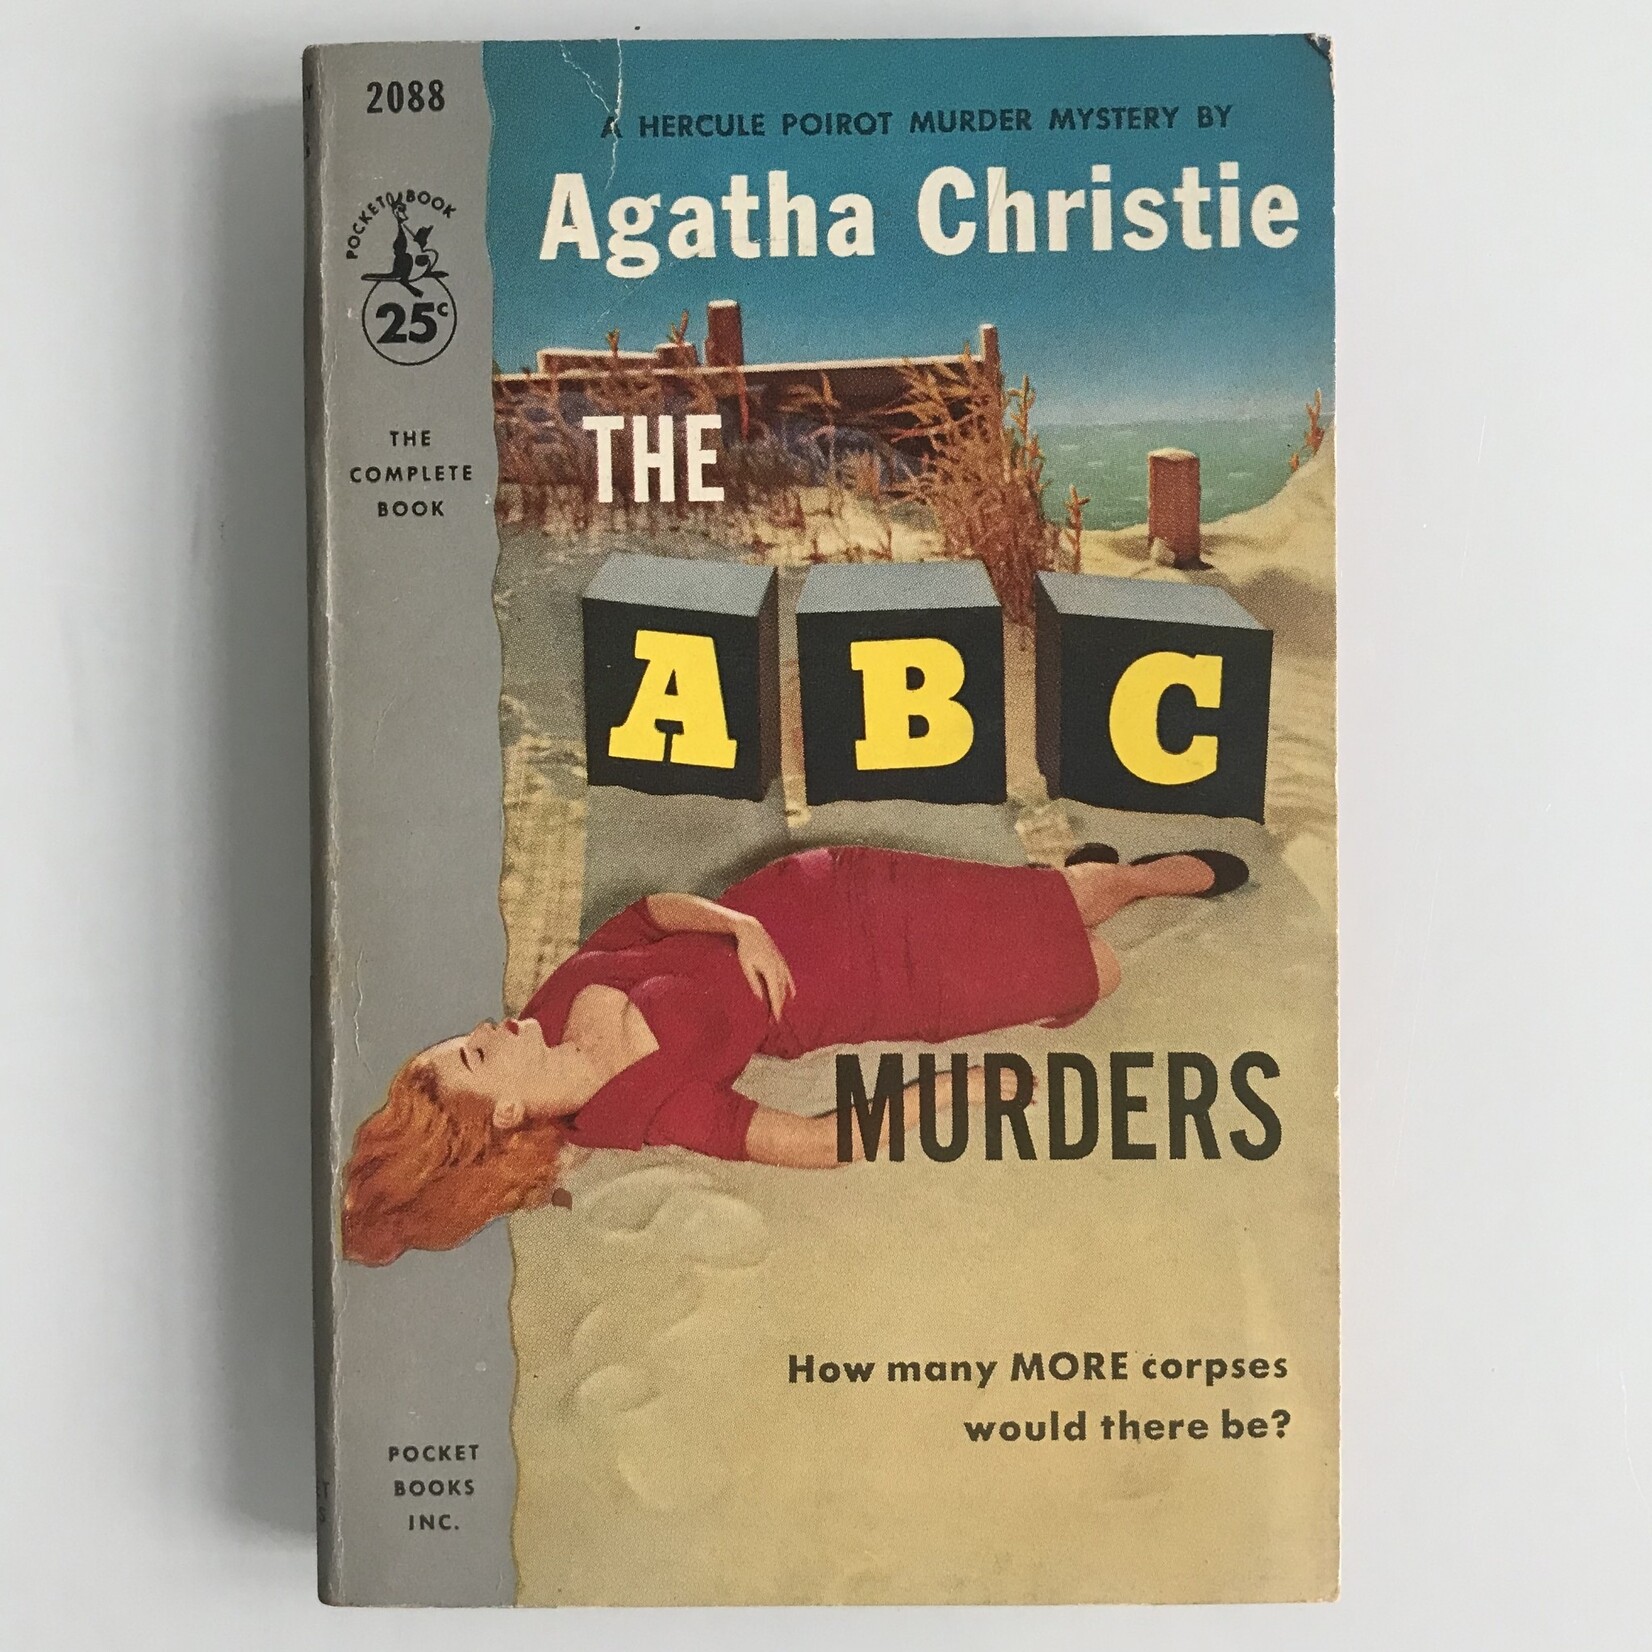 Agatha Christie - The ABC Murders (Silver Pocket Book Edition) - Paperback (USED - G)